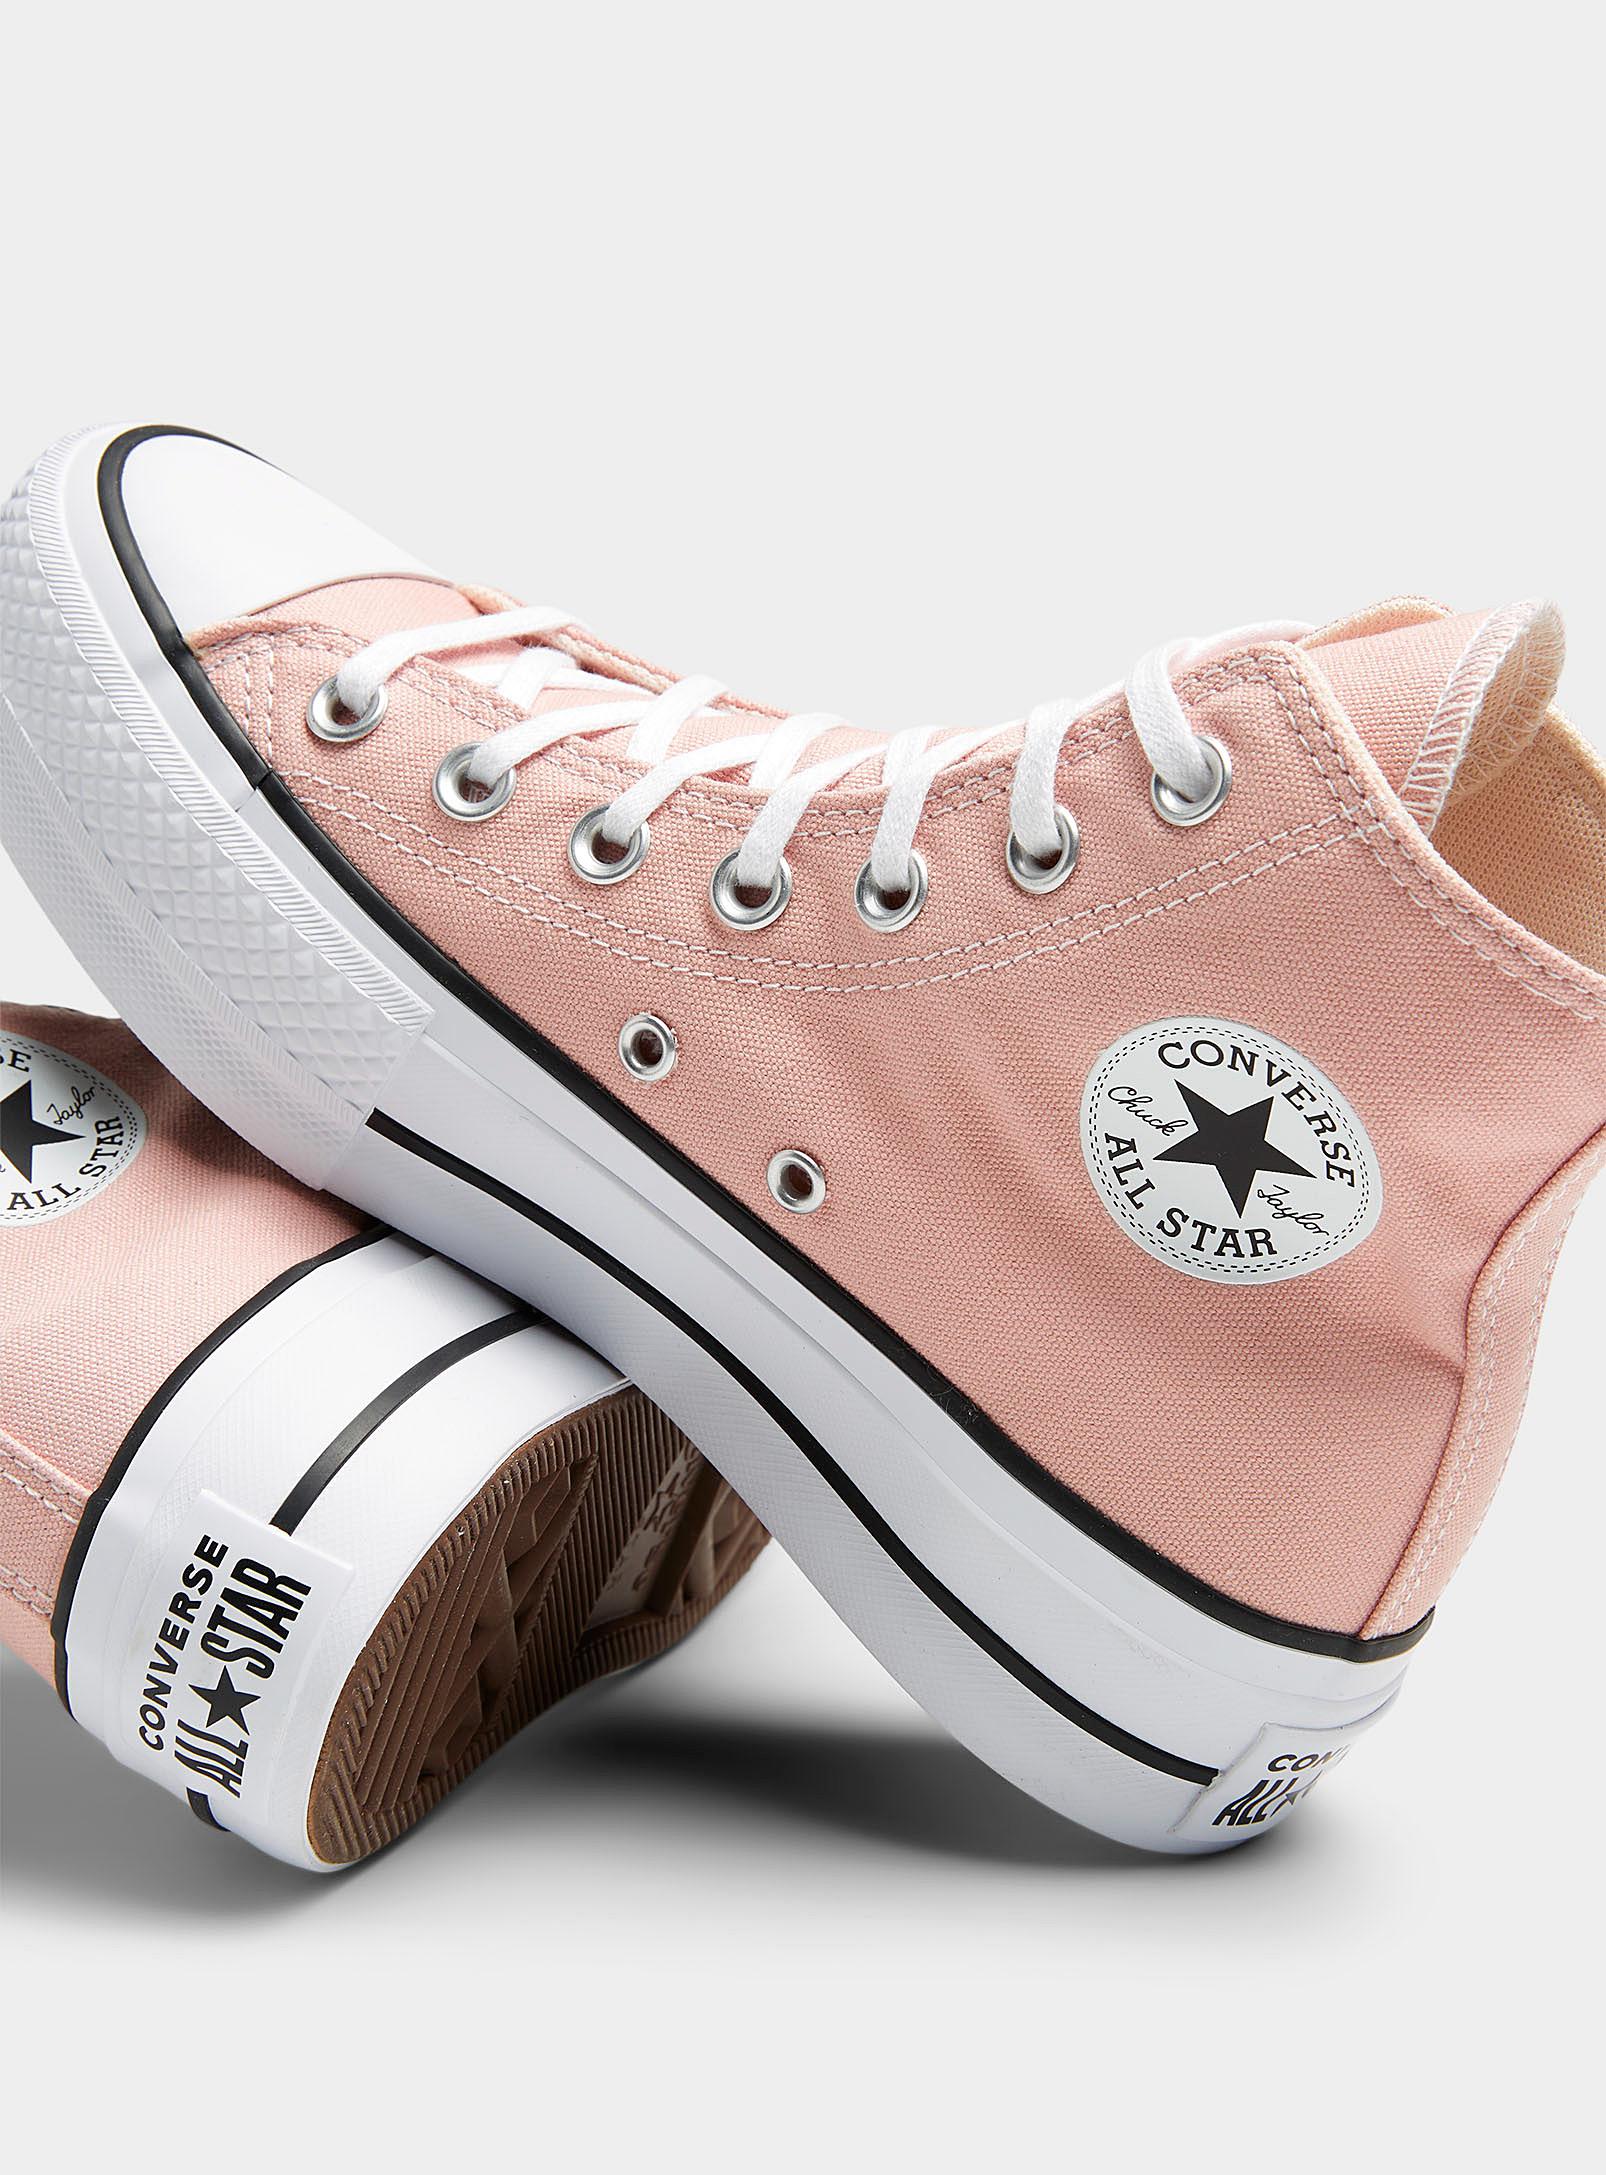 Converse Canvas Chuck Taylor All Star High Top Pink Clay Platform Sneakers  Women | Lyst